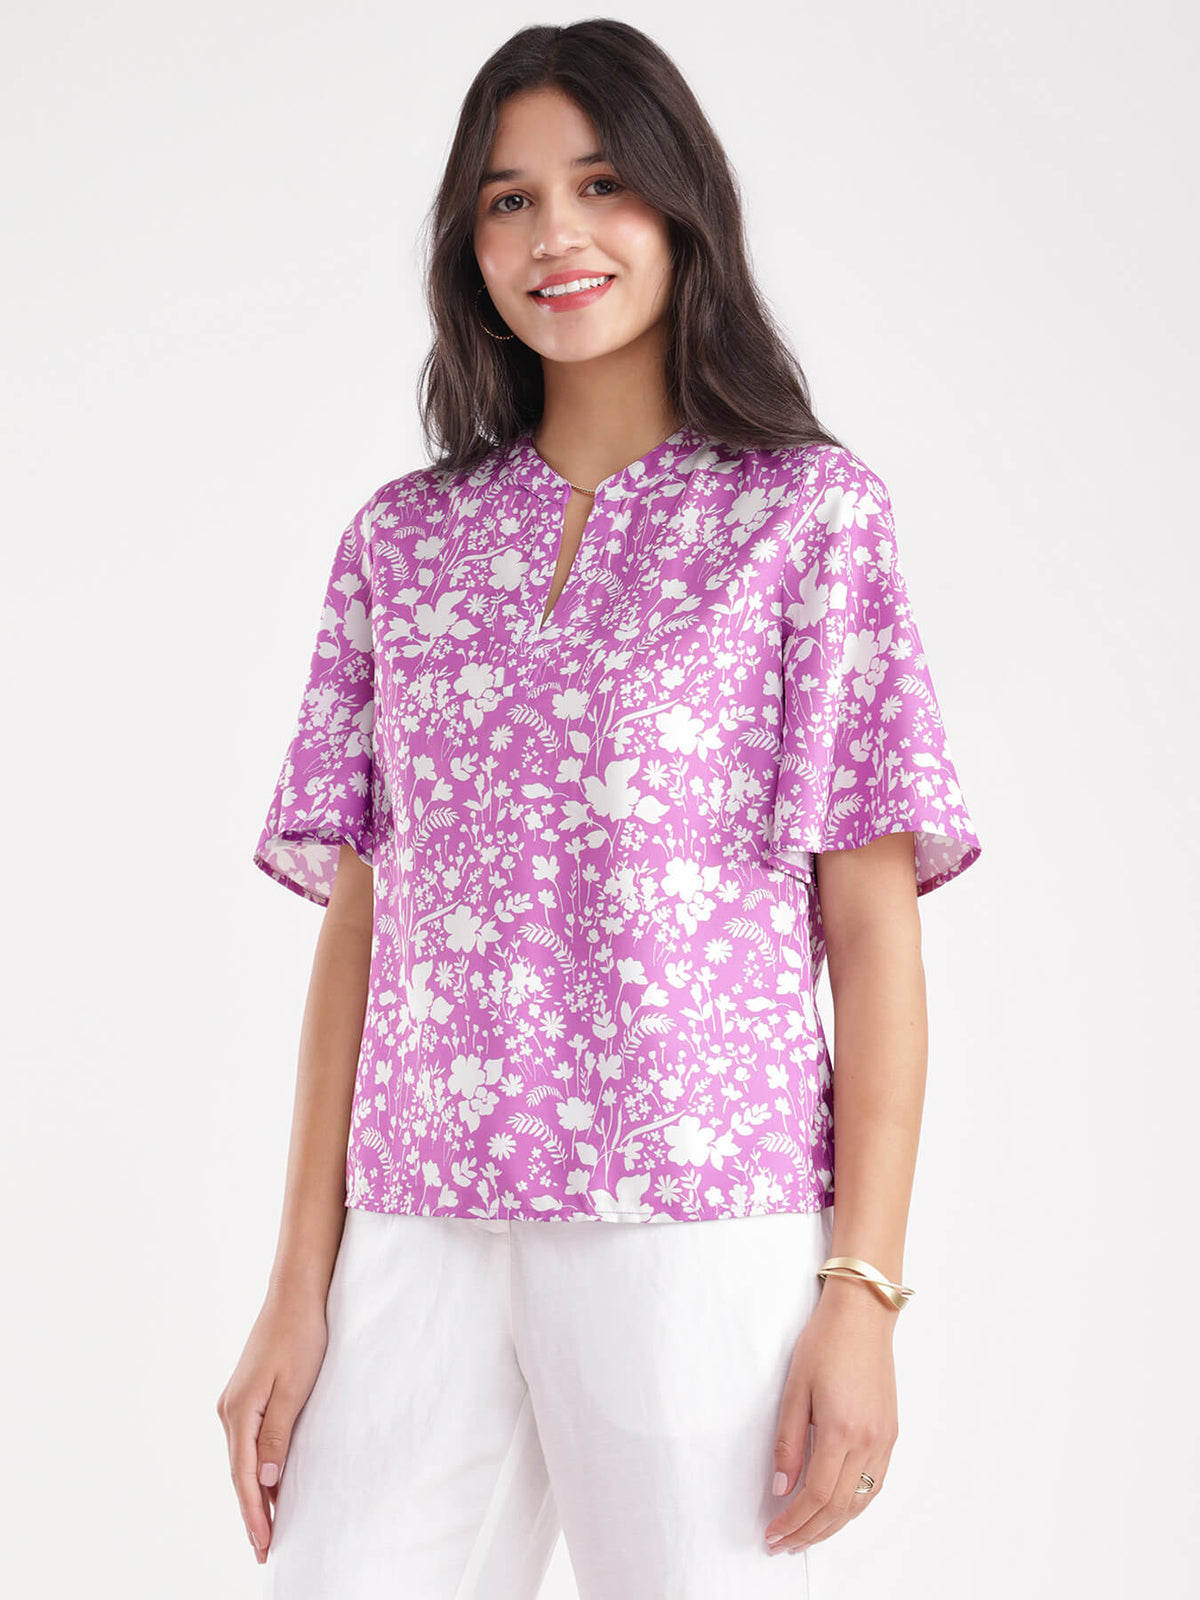 Floral Print Top - Lilac And White